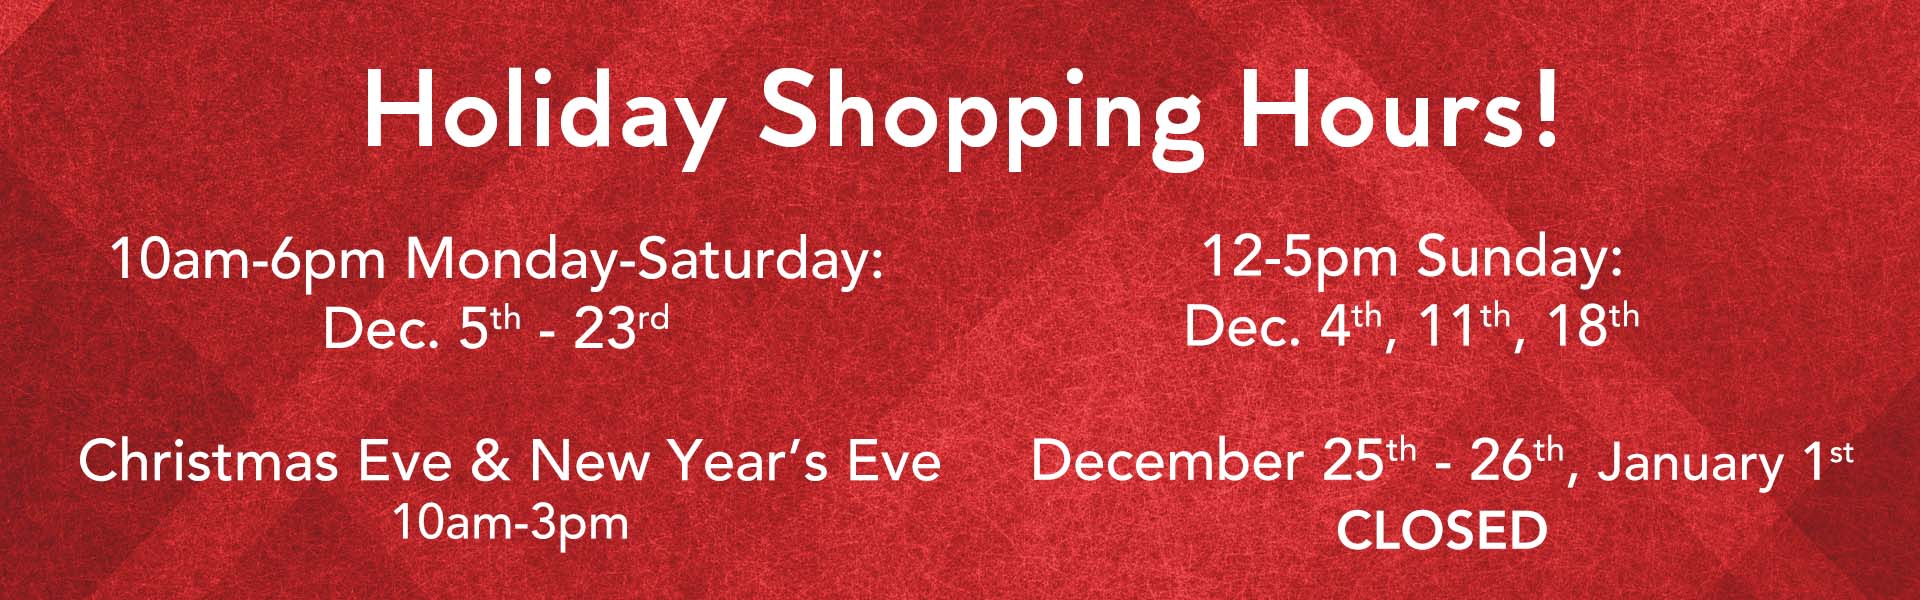 Extended Holiday Shopping Hours